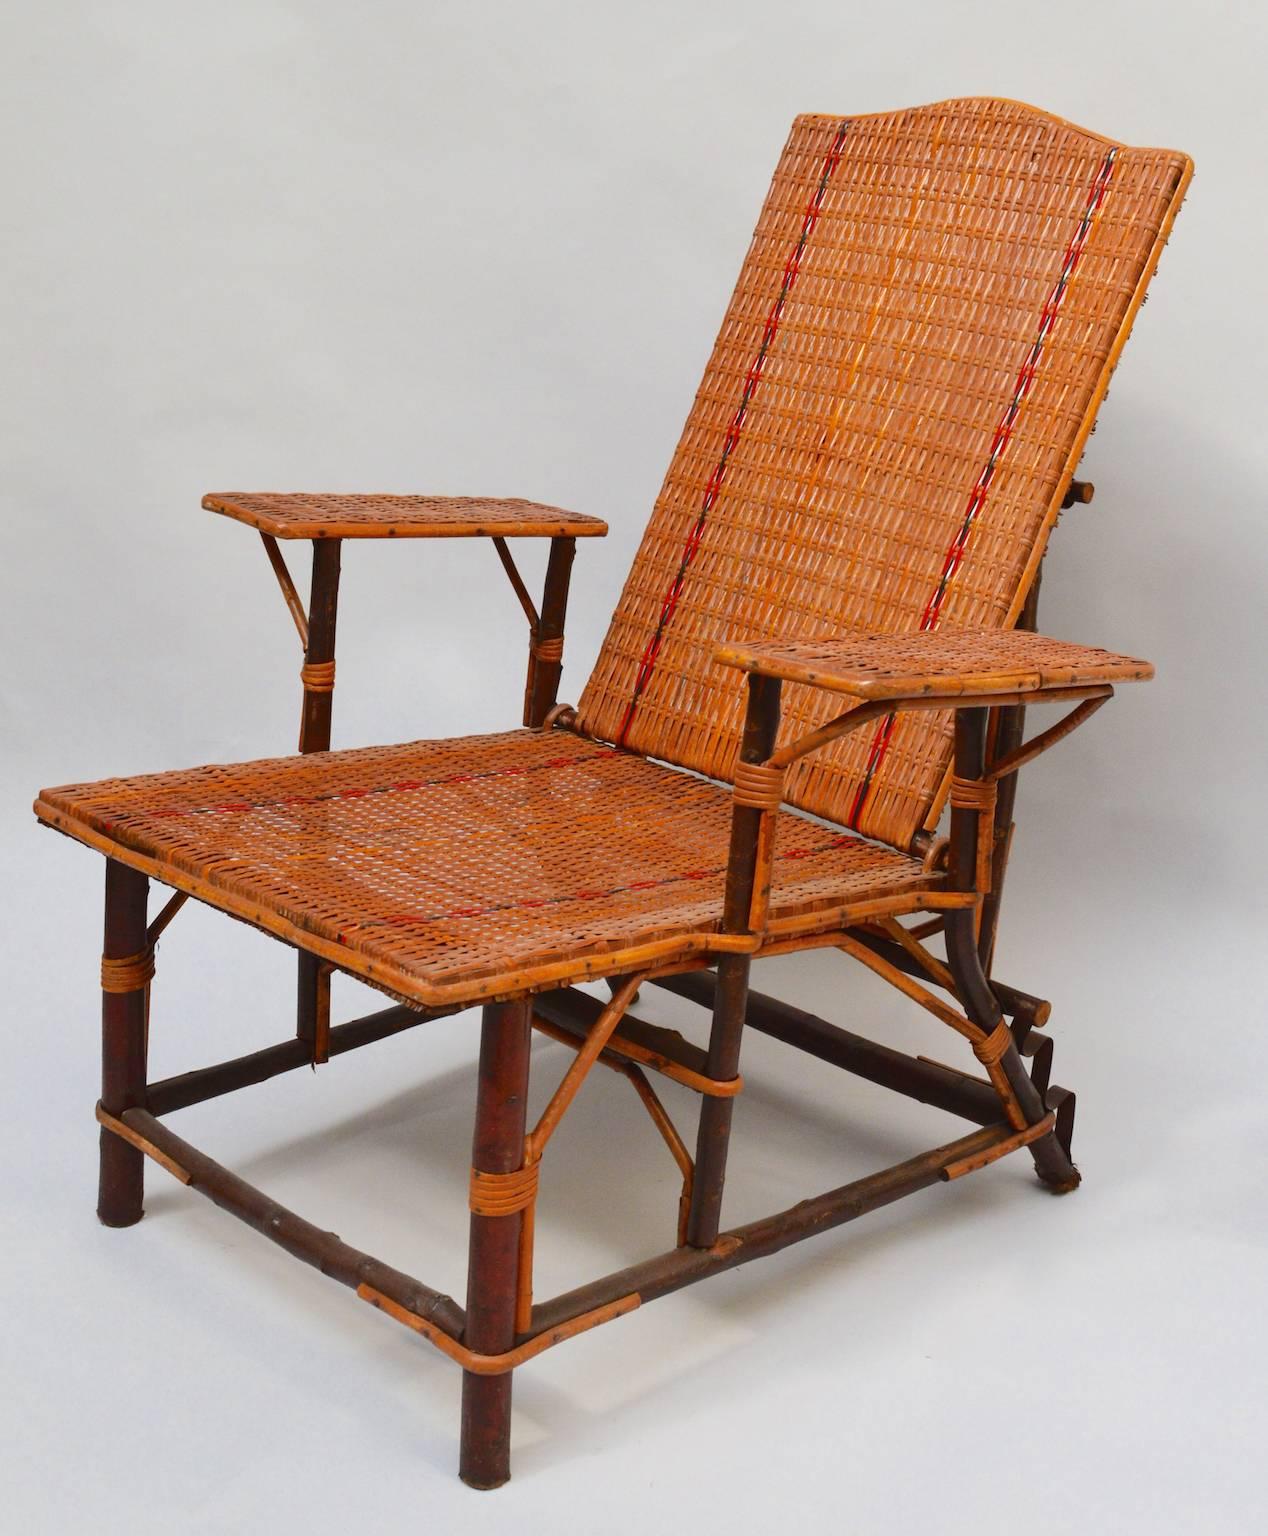 Art Deco Vintage French Woven Rattan and Wicker Lounge Chair